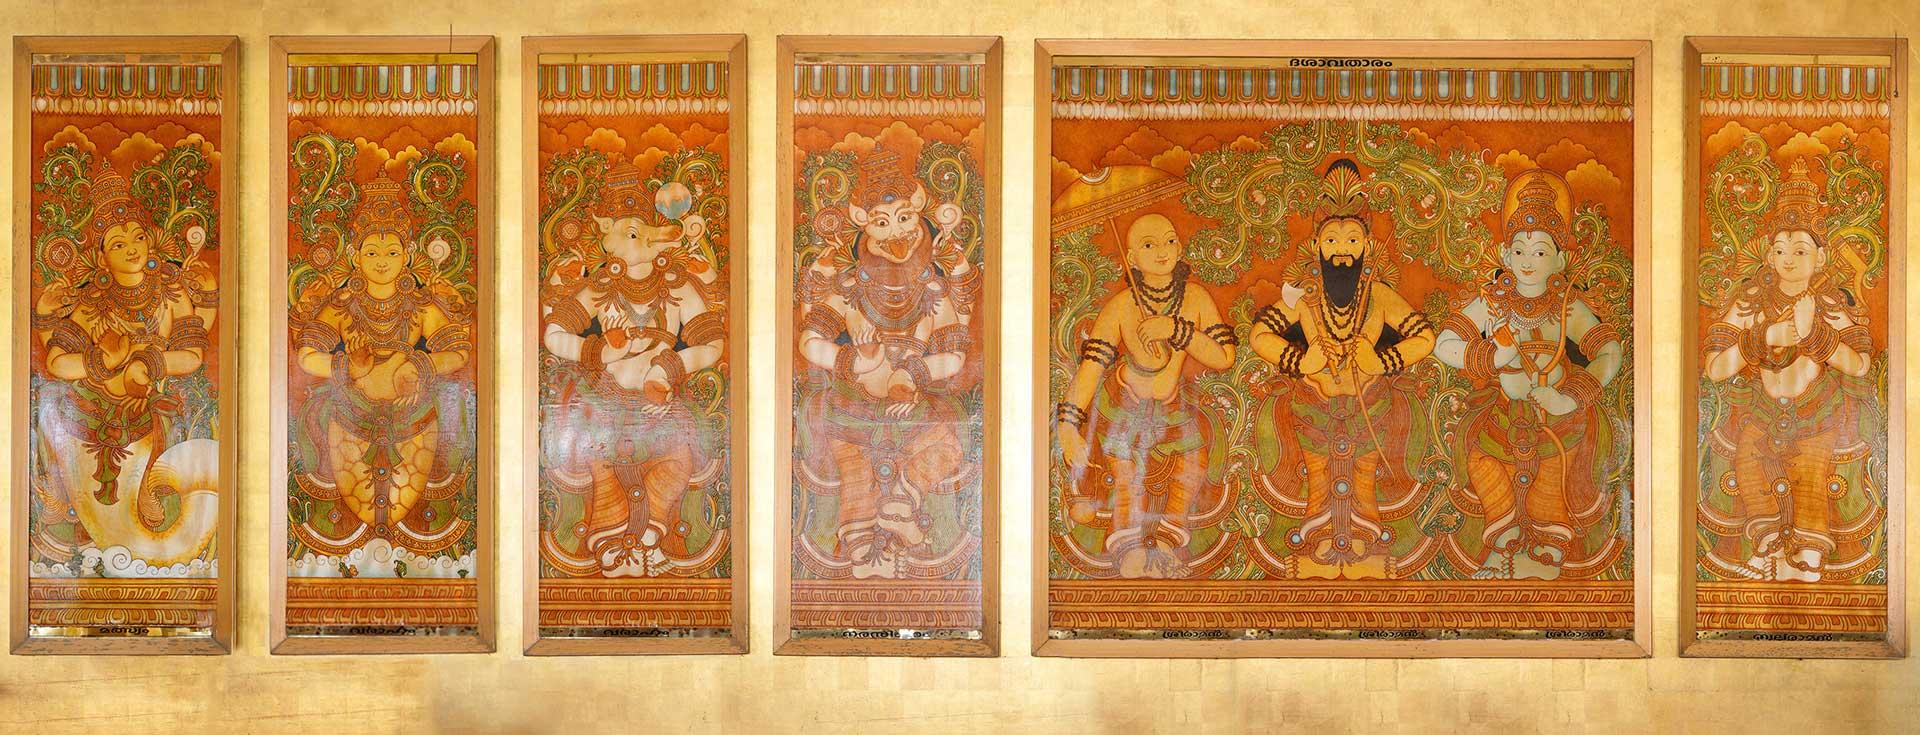 The murals of Kerala - A living history of the region